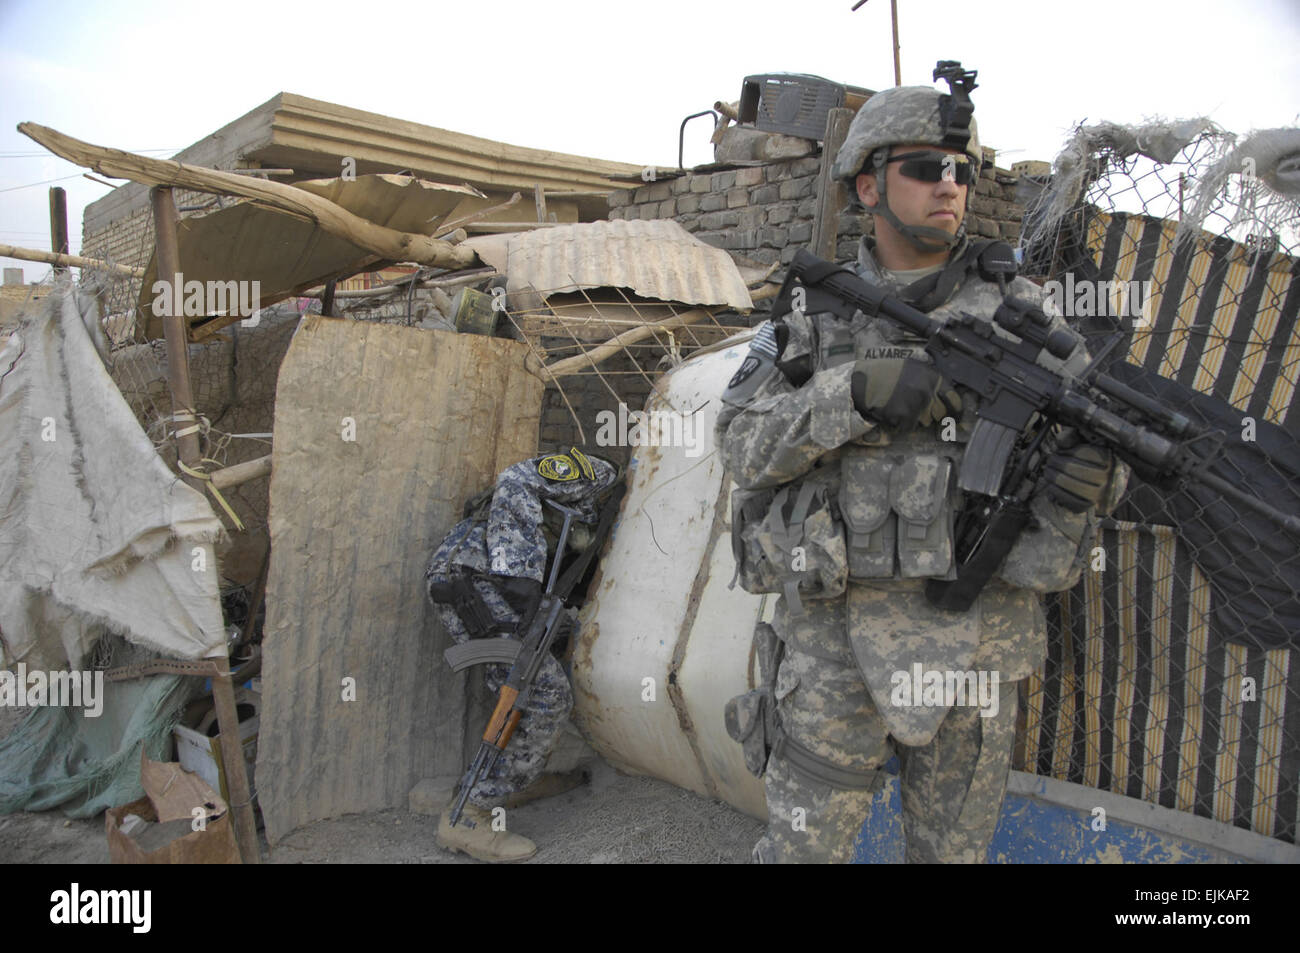 A member of the U.S. Army National Police Transition Team searches for weapons caches during a an operation with Iraqi National Police in Jisr Diyala, Iraq, March 31, 2008.  Sgt. Eric C. Hein Released Stock Photo